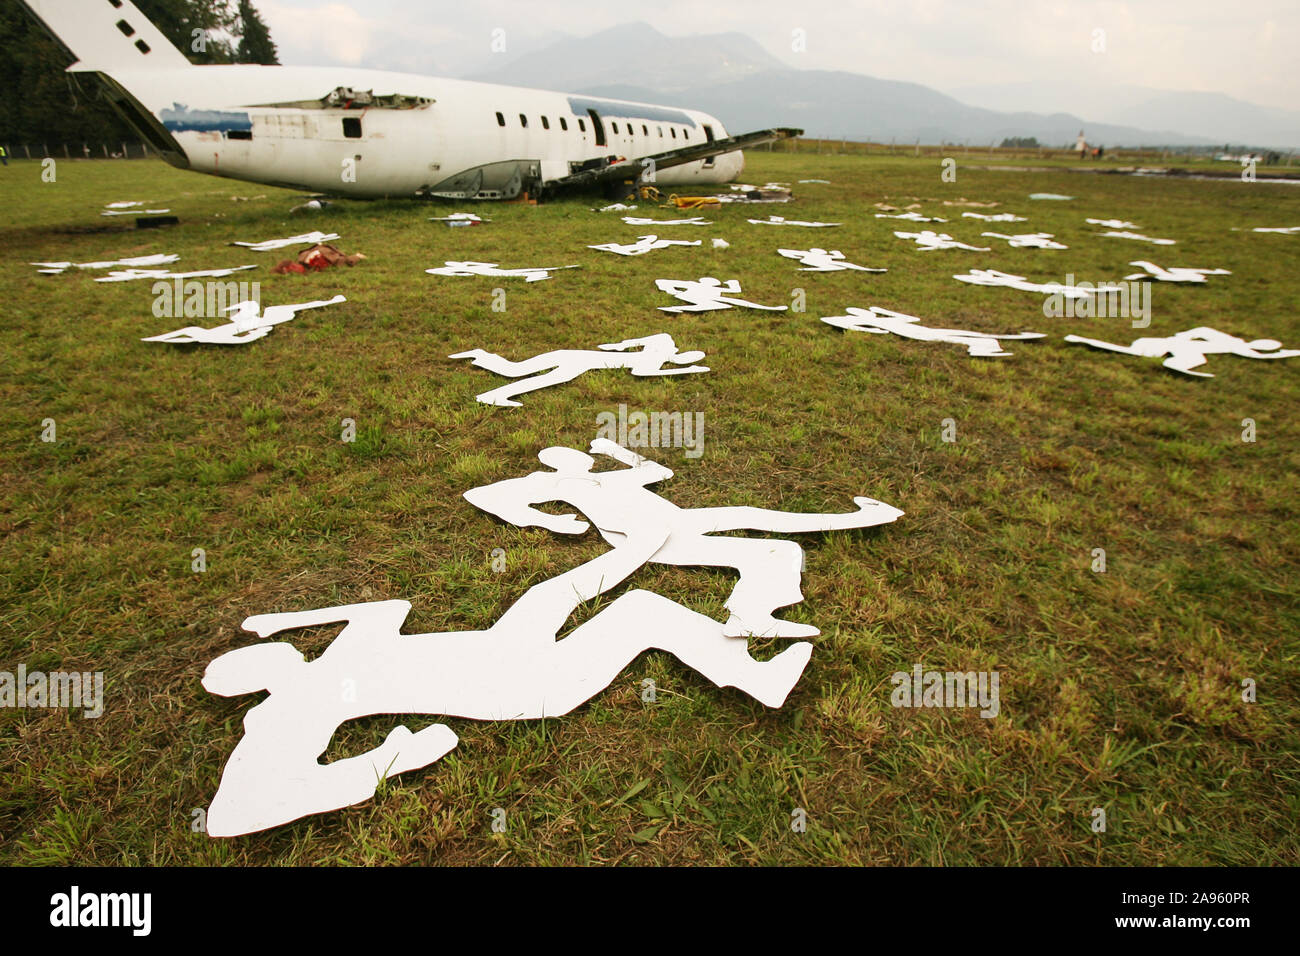 Brnik, Slovenia, October 14, 2006: Cardboard cutouts depicting victims of an air crash lie in a field during an emergency response simulation. Stock Photo